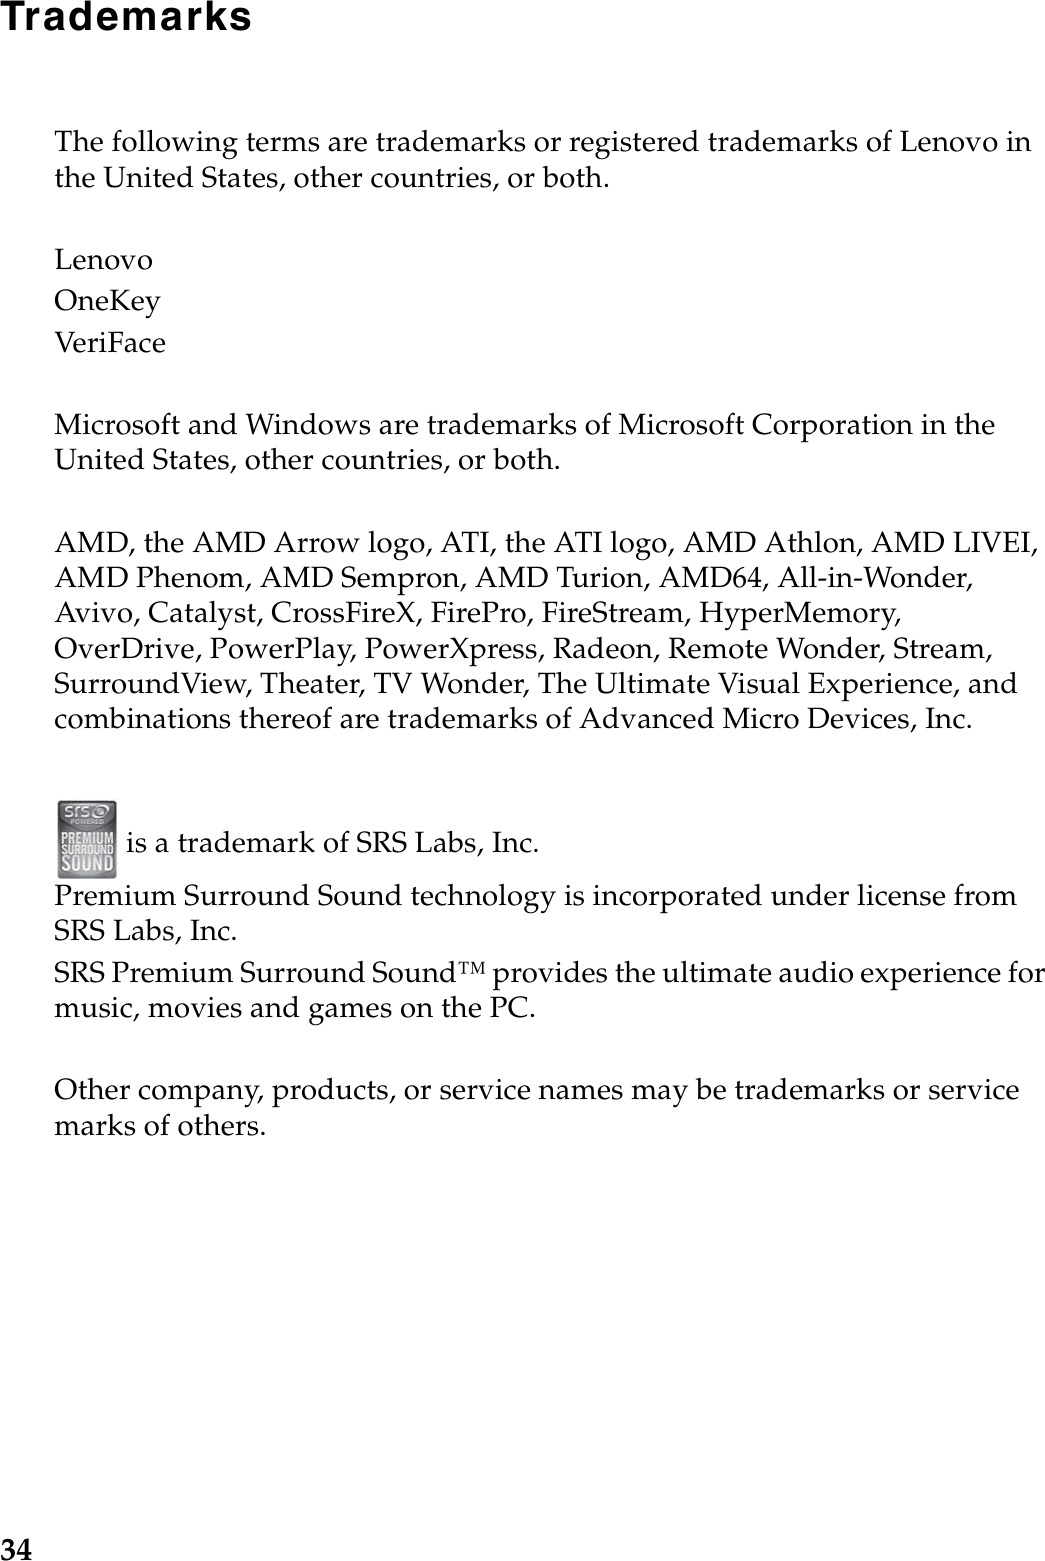 34TrademarksThe following terms are trademarks or registered trademarks of Lenovo in the United States, other countries, or both.LenovoOneKeyVeri FaceMicrosoft and Windows are trademarks of Microsoft Corporation in the United States, other countries, or both.AMD, the AMD Arrow logo, ATI, the ATI logo, AMD Athlon, AMD LIVEI, AMD Phenom, AMD Sempron, AMD Turion, AMD64, All-in-Wonder, Avivo, Catalyst, CrossFireX, FirePro, FireStream, HyperMemory, OverDrive, PowerPlay, PowerXpress, Radeon, Remote Wonder, Stream, SurroundView, Theater, TV Wonder, The Ultimate Visual Experience, and combinations thereof are trademarks of Advanced Micro Devices, Inc. is a trademark of SRS Labs, Inc.Premium Surround Sound technology is incorporated under license from SRS Labs, Inc.SRS Premium Surround Sound™ provides the ultimate audio experience for music, movies and games on the PC.Other company, products, or service names may be trademarks or service marks of others.